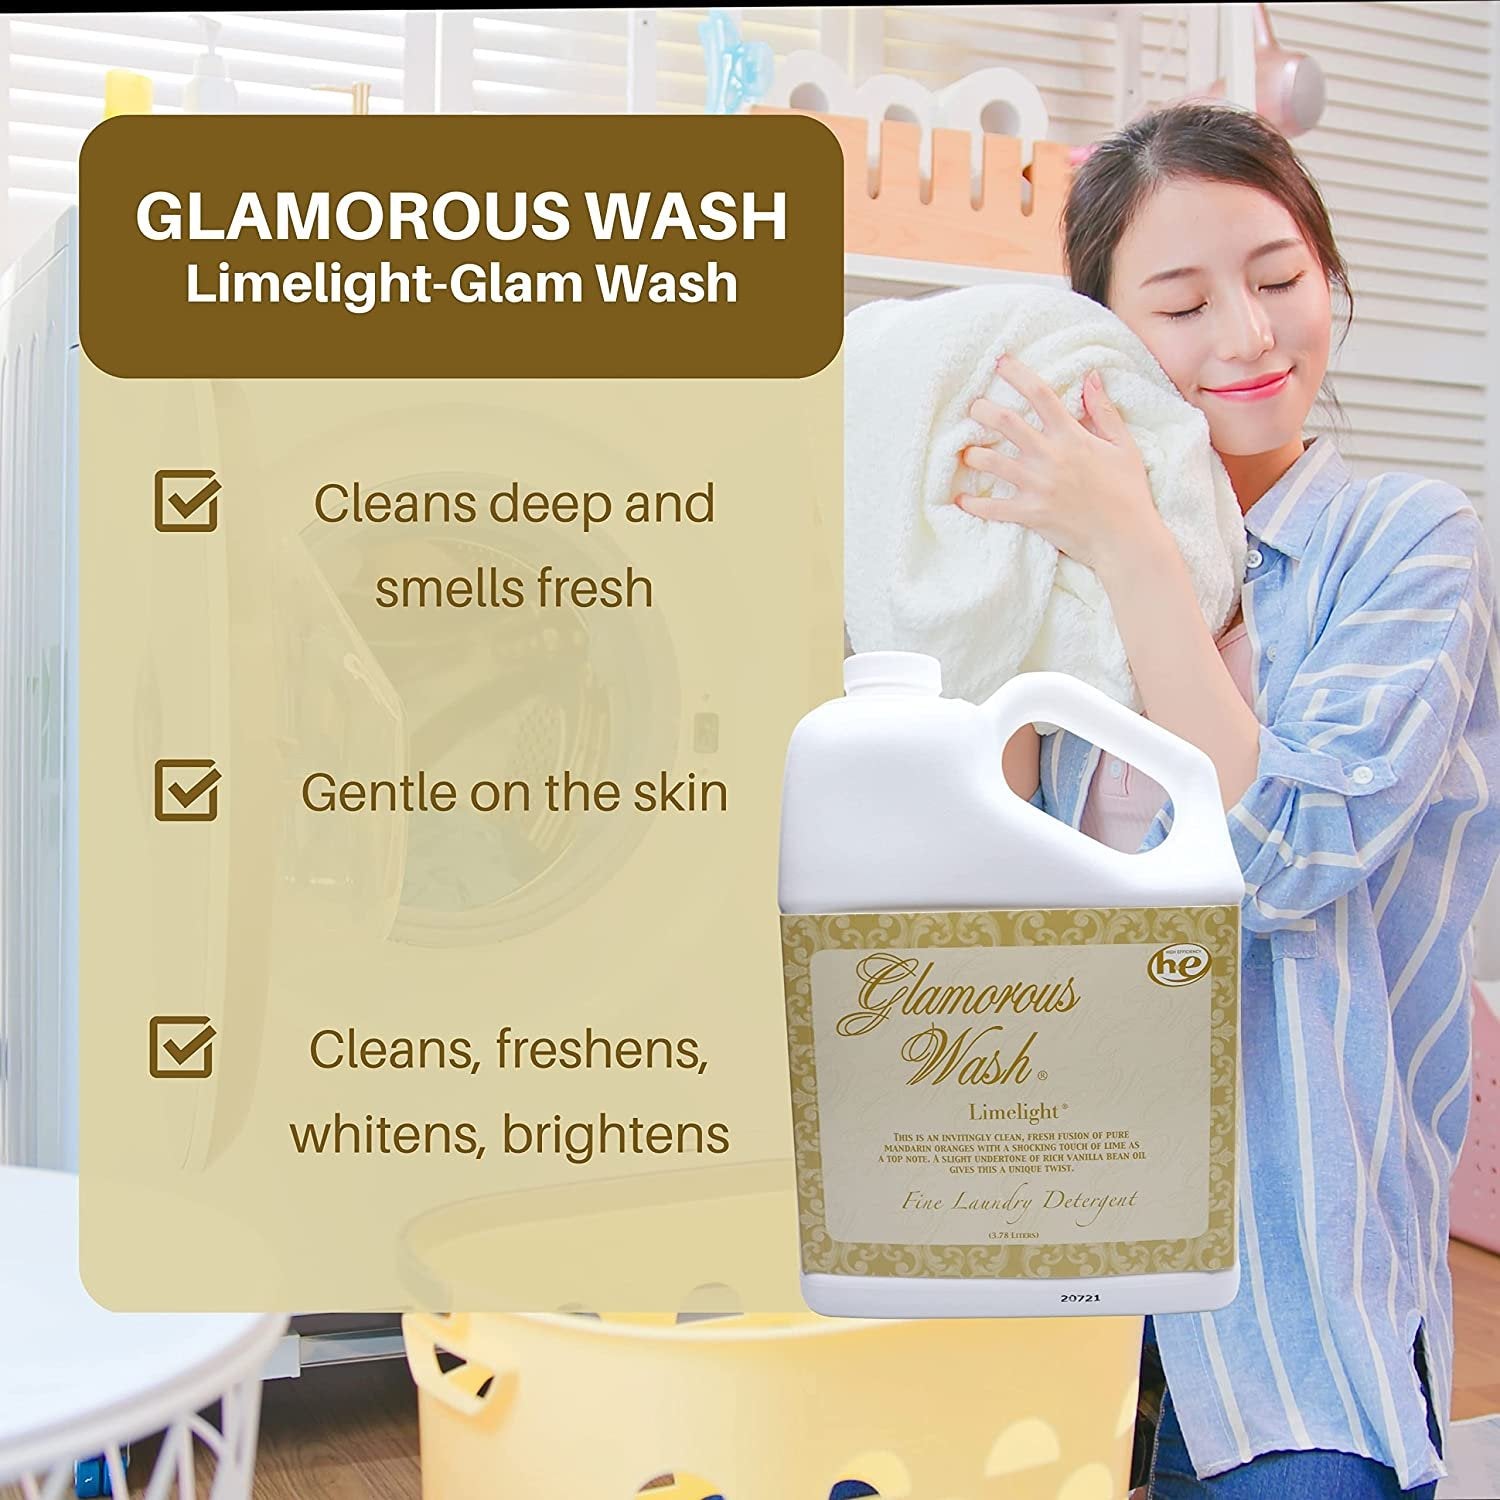 Tyler Candle Company Glamorous Wash Limelight Scent Fine Laundry Liquid Detergent - Liquid Laundry Detergent for Clothing - Hand and Machine Washable - 3.78L (1Gal) Container with Bonus Key Chain